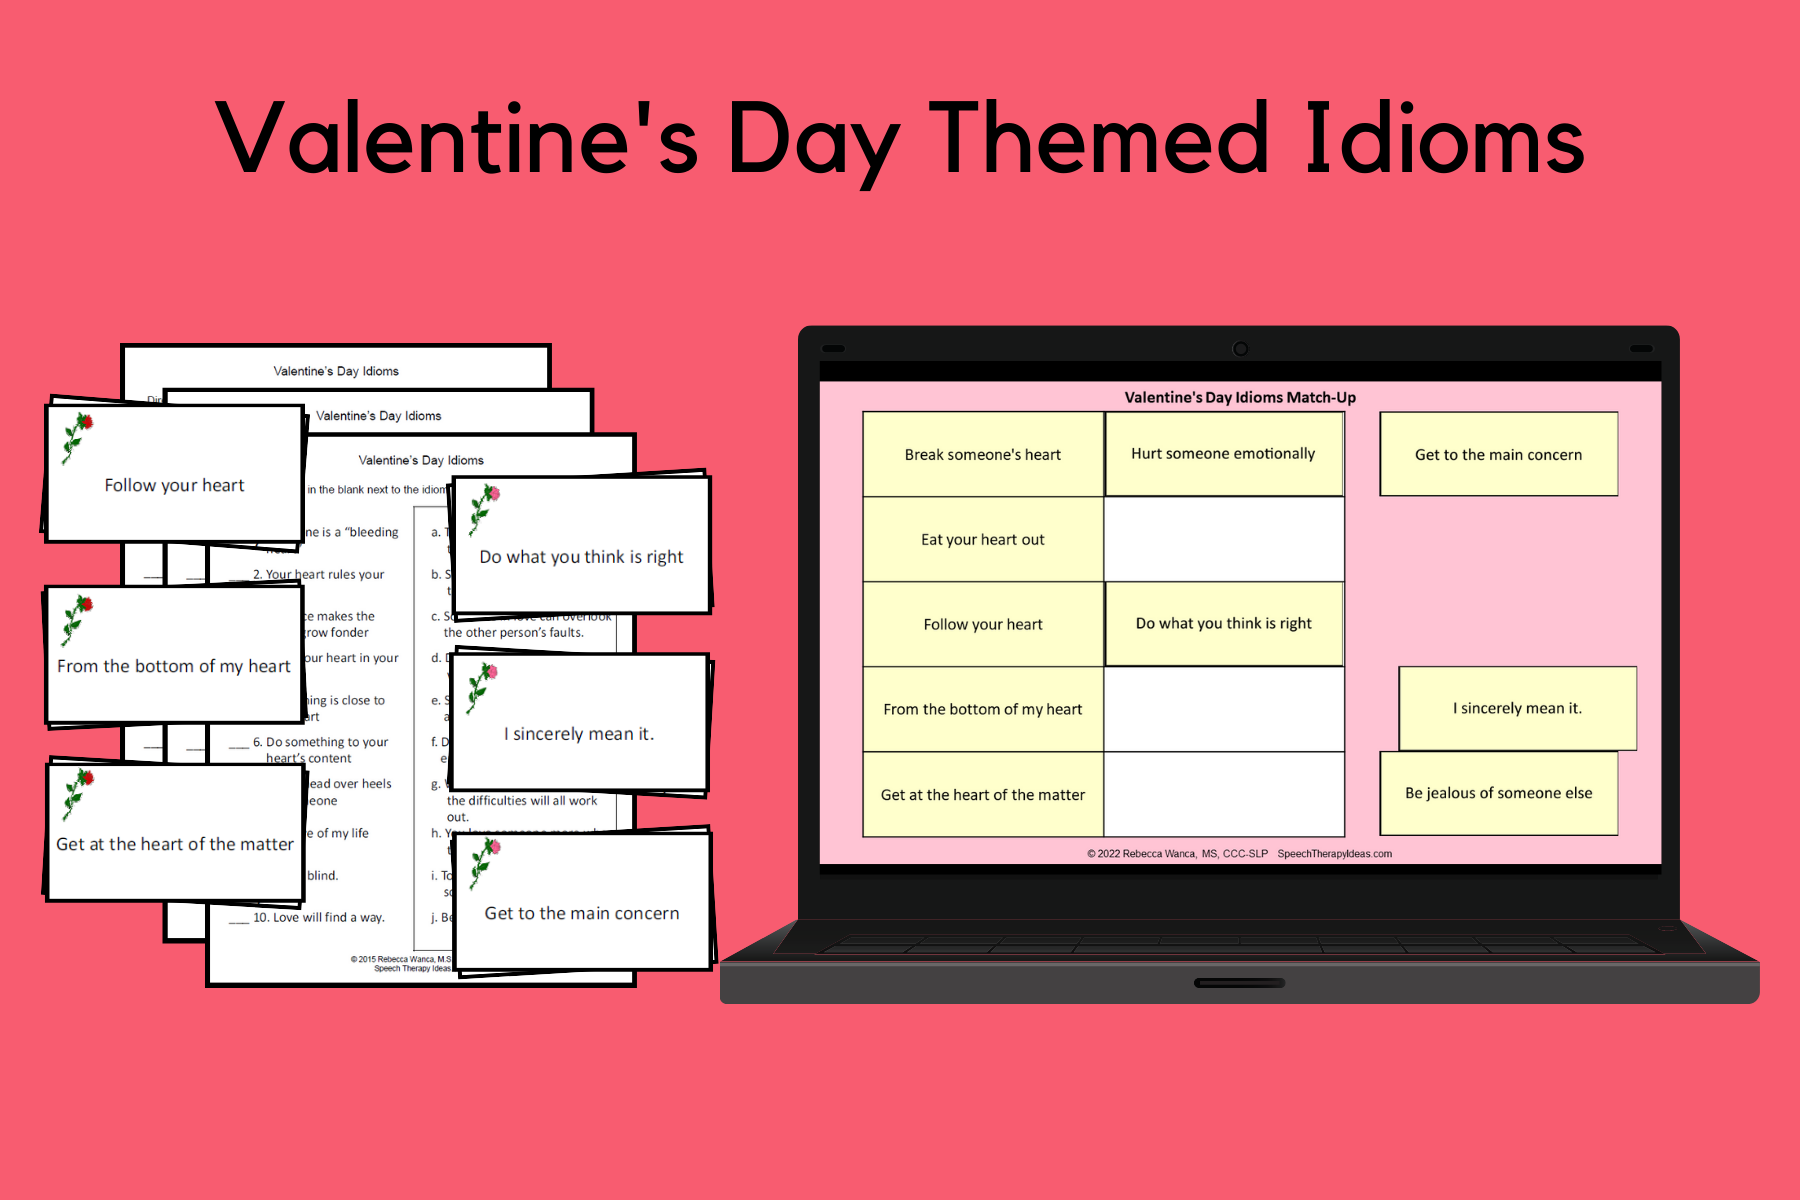 Valentine’s Day Themed Idiom Cards and Worksheets